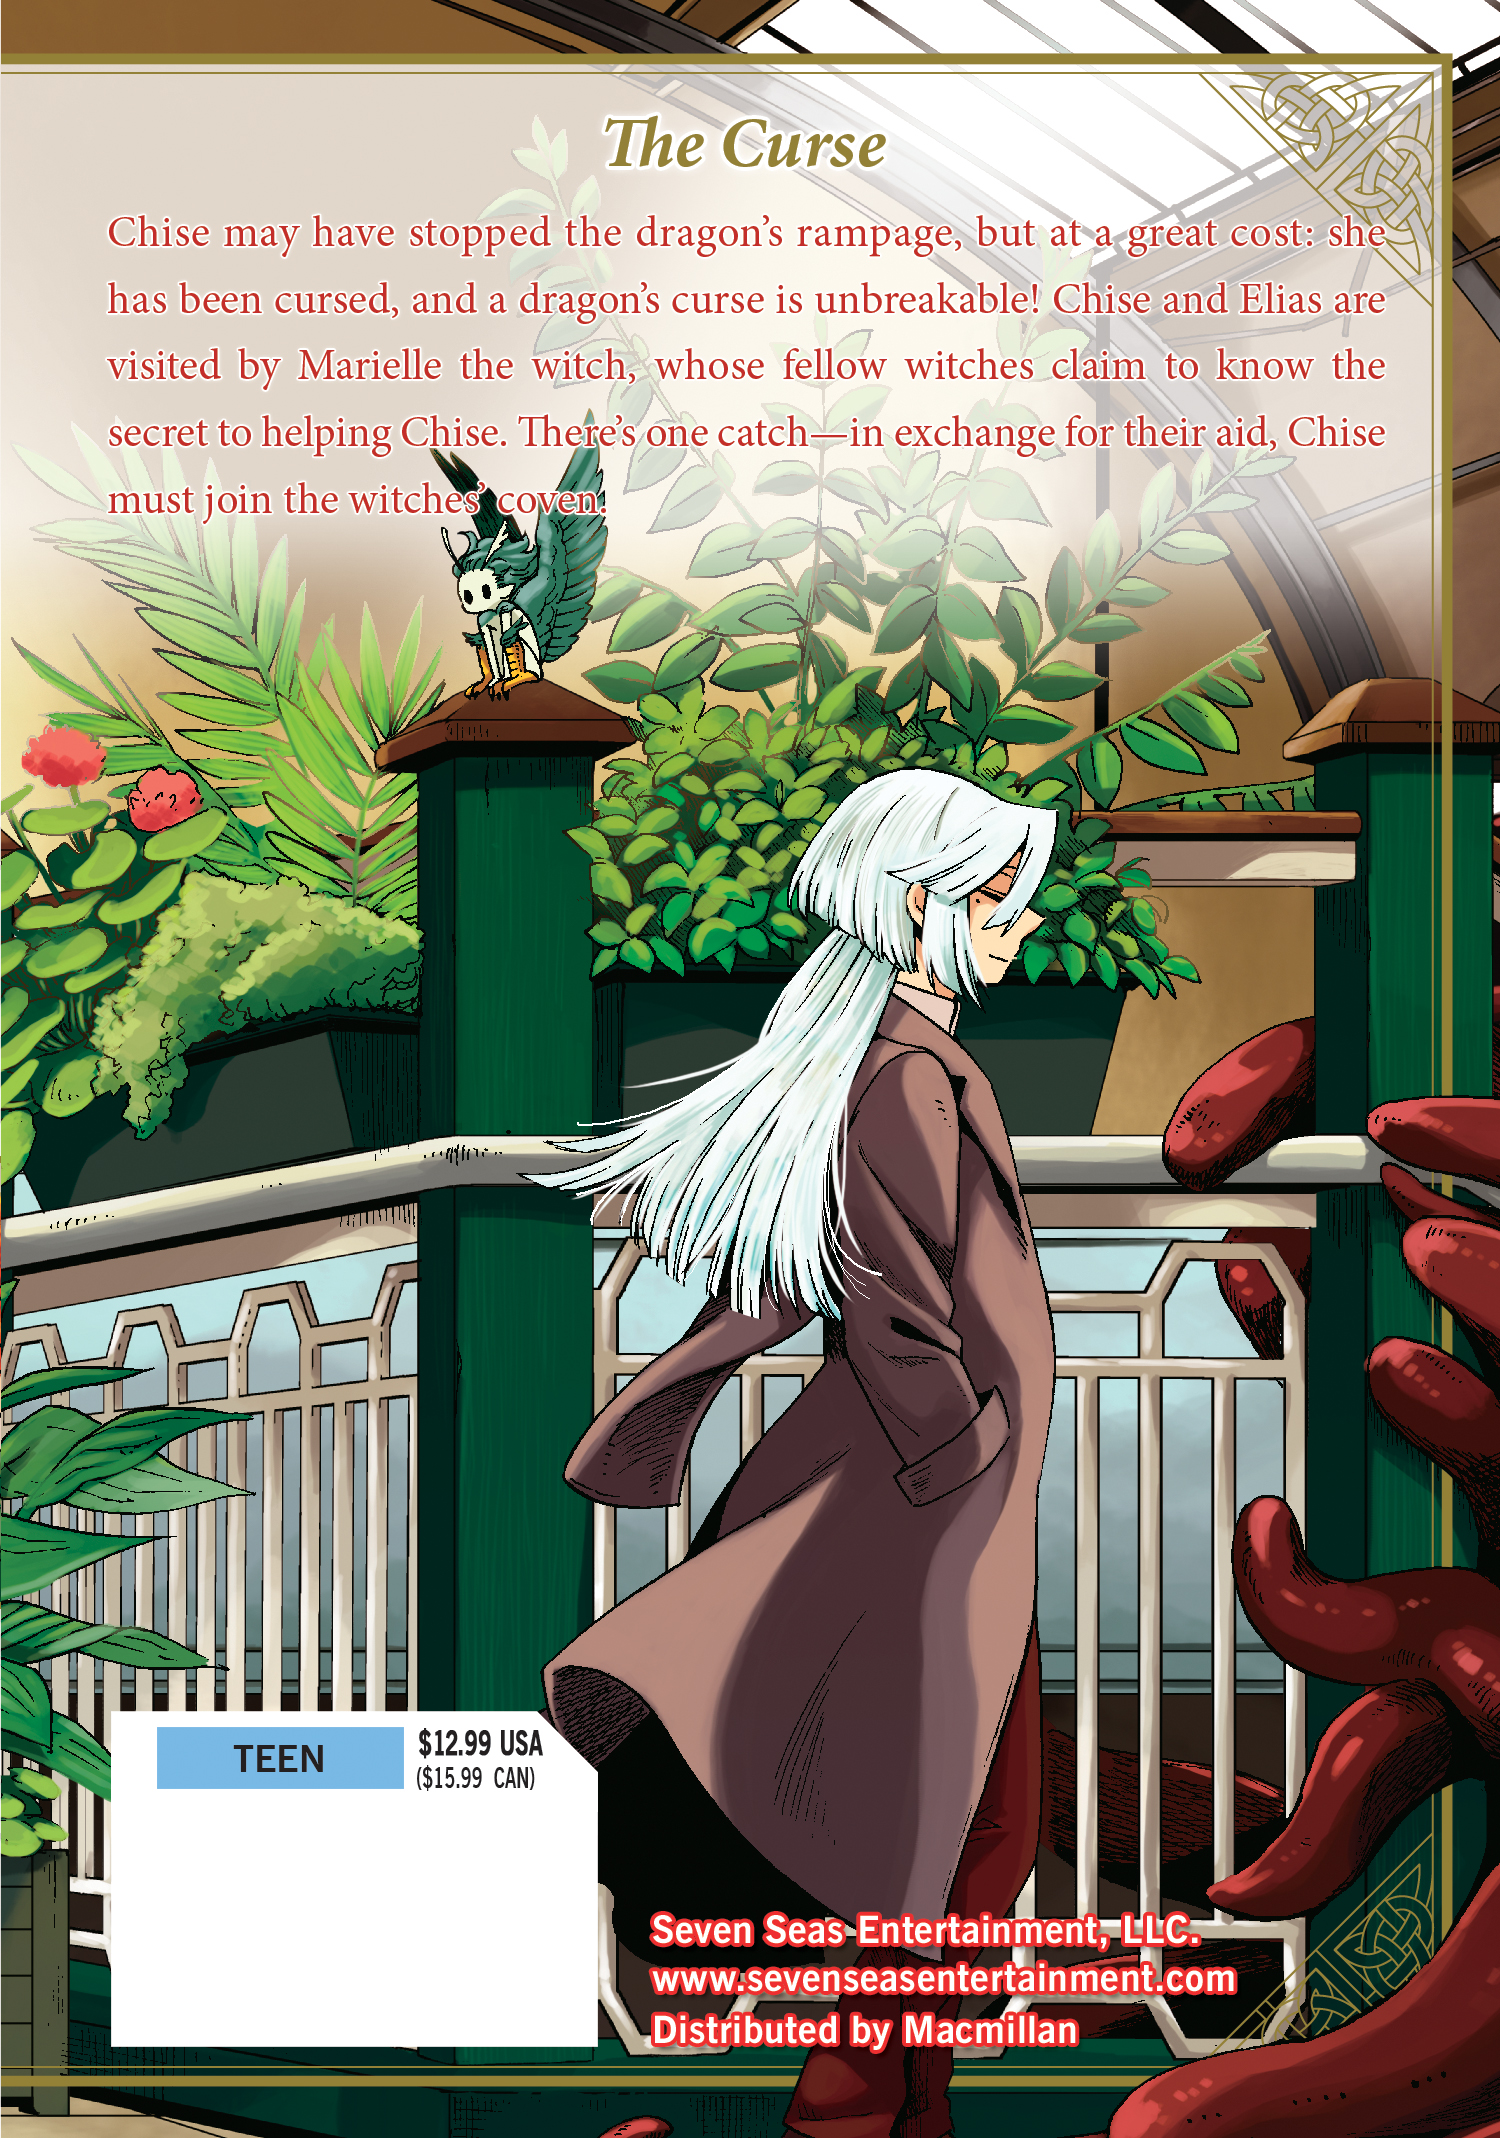 Ancient Magus: The Ancient Magus' Bride Vol. 1